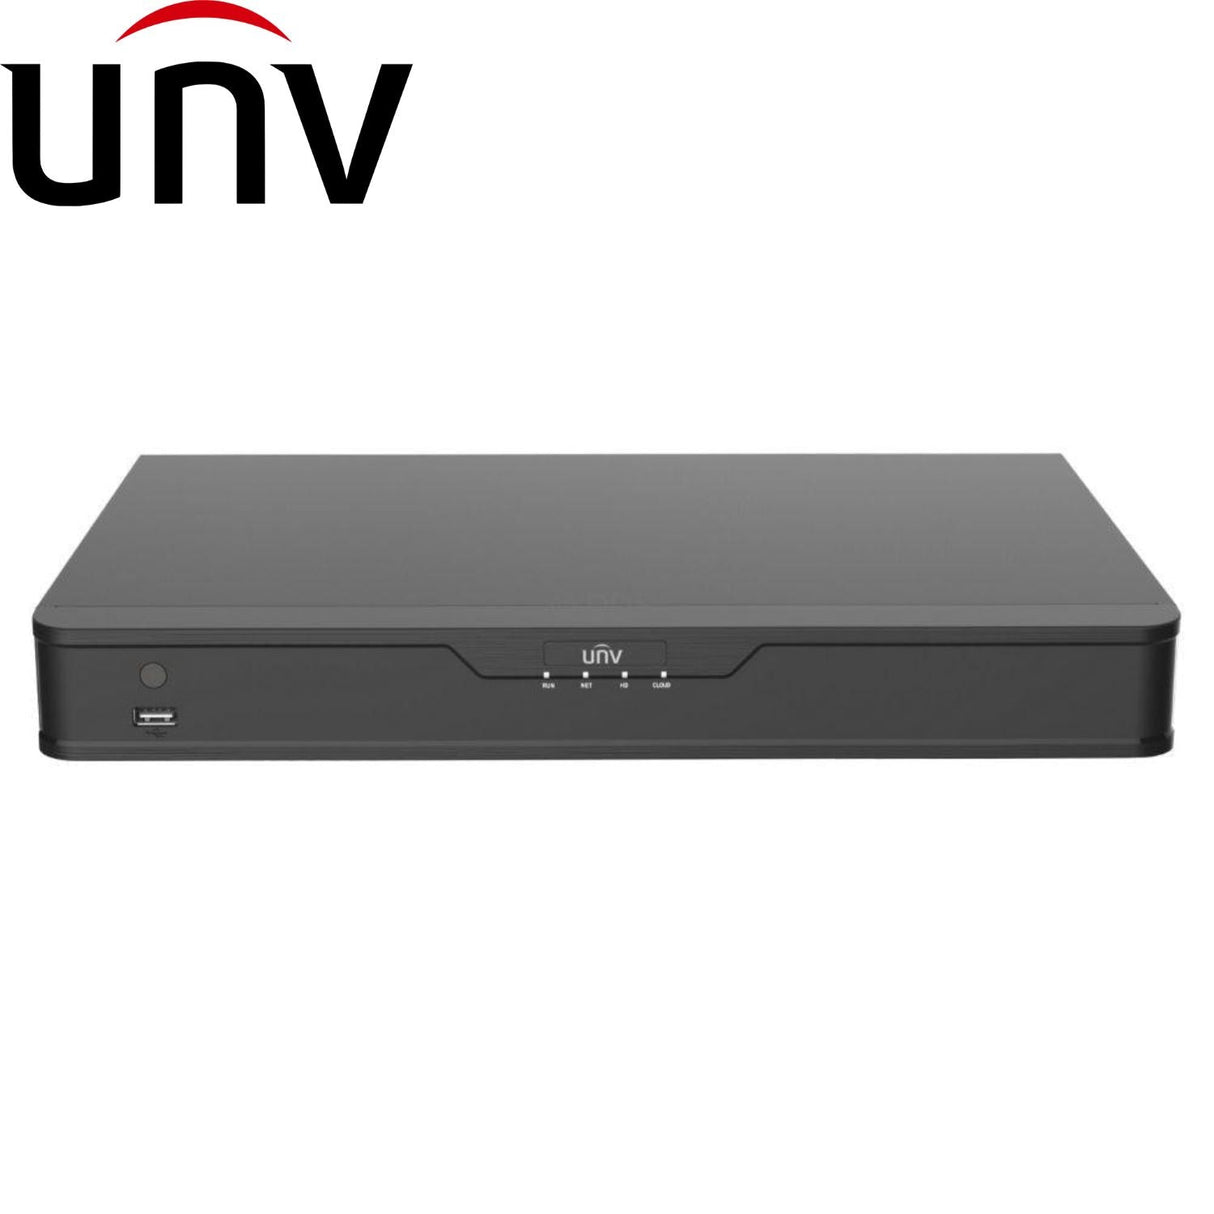 Uniview LightHunter Security System: 10x 6MP Turret Cams, 16CH 4K NVR + HDD